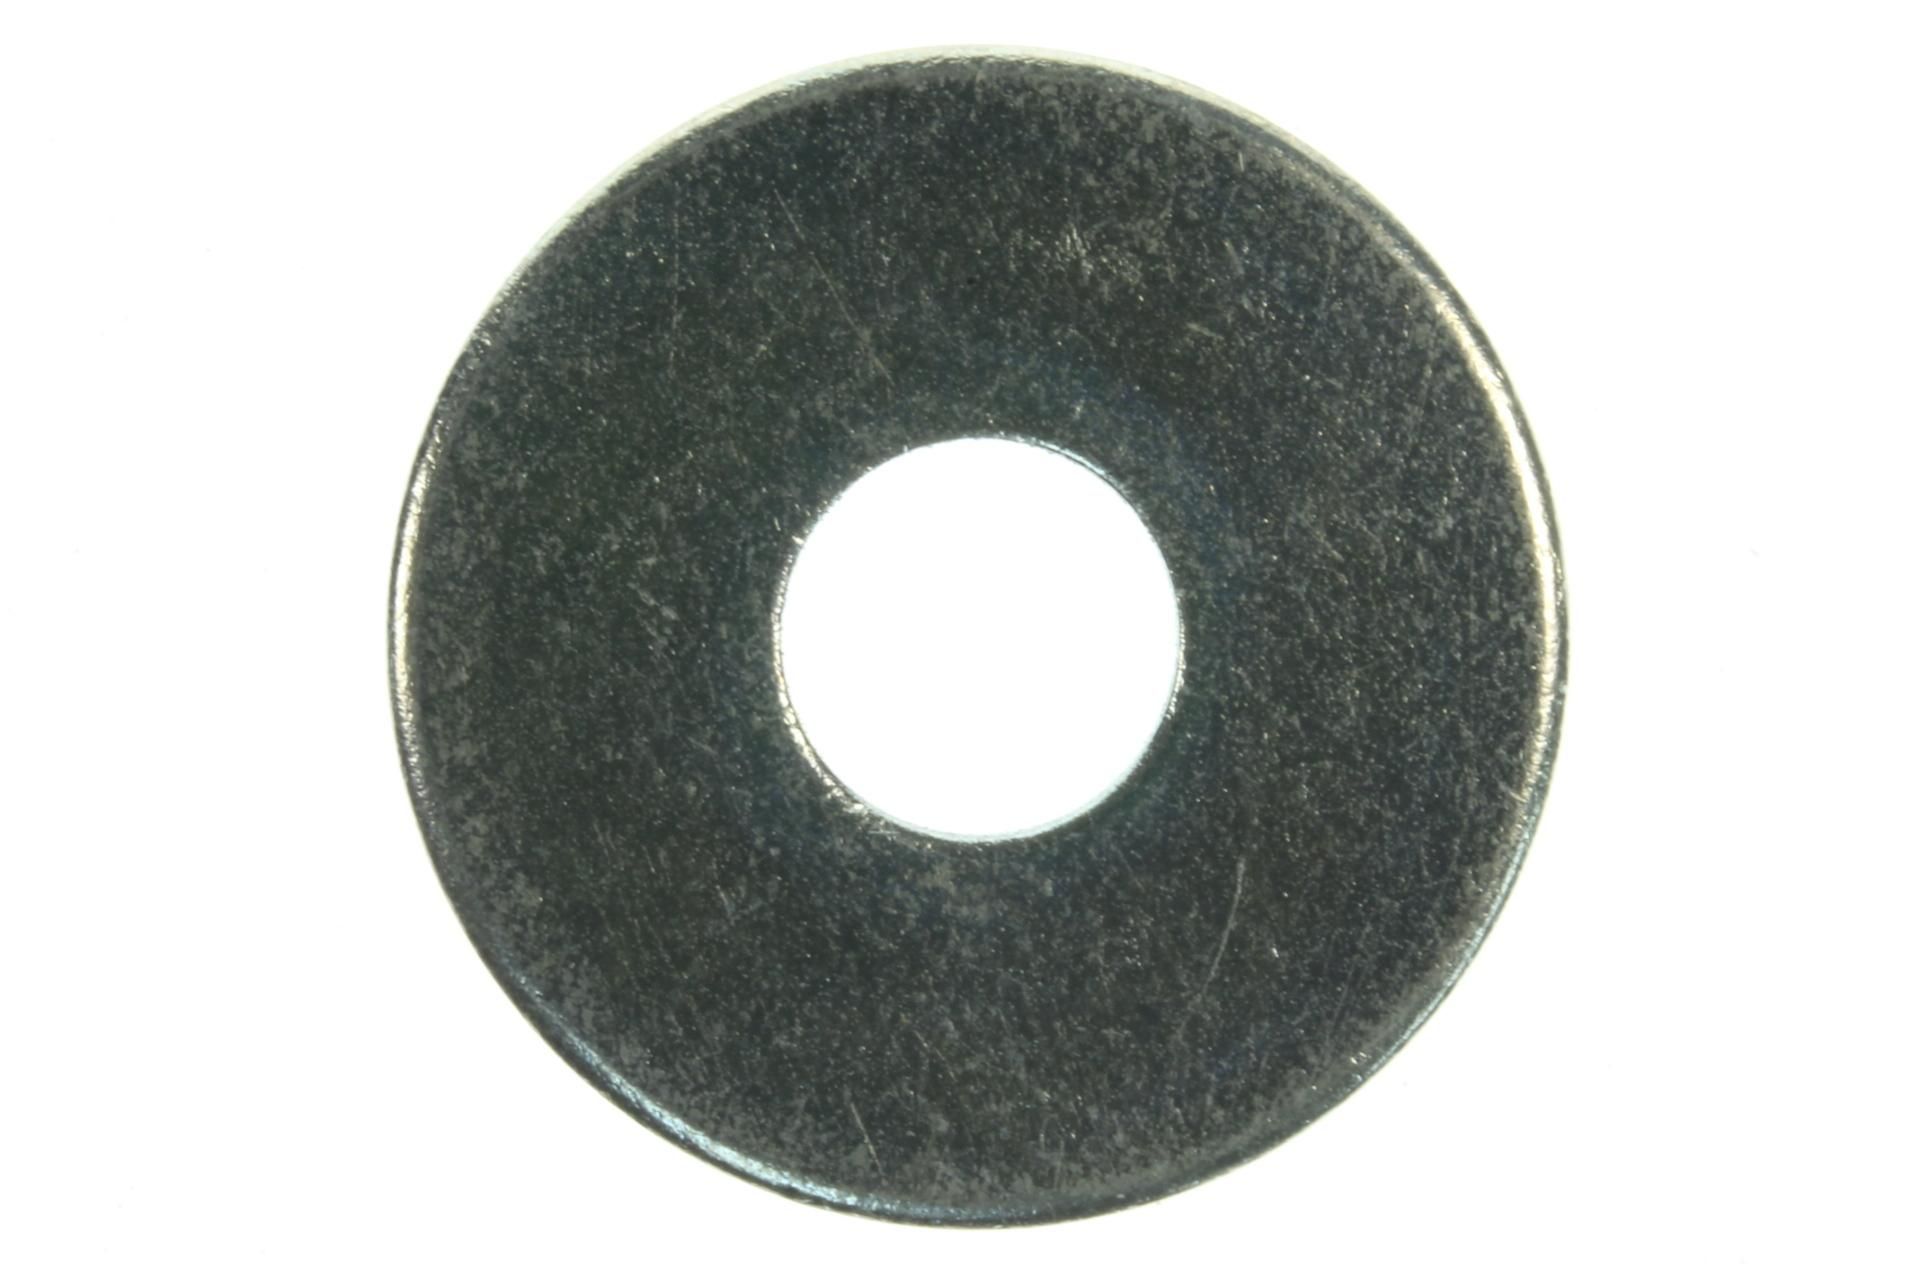 09160-06059 Superseded by 09160-06088 - WASHER 6.5X20X1